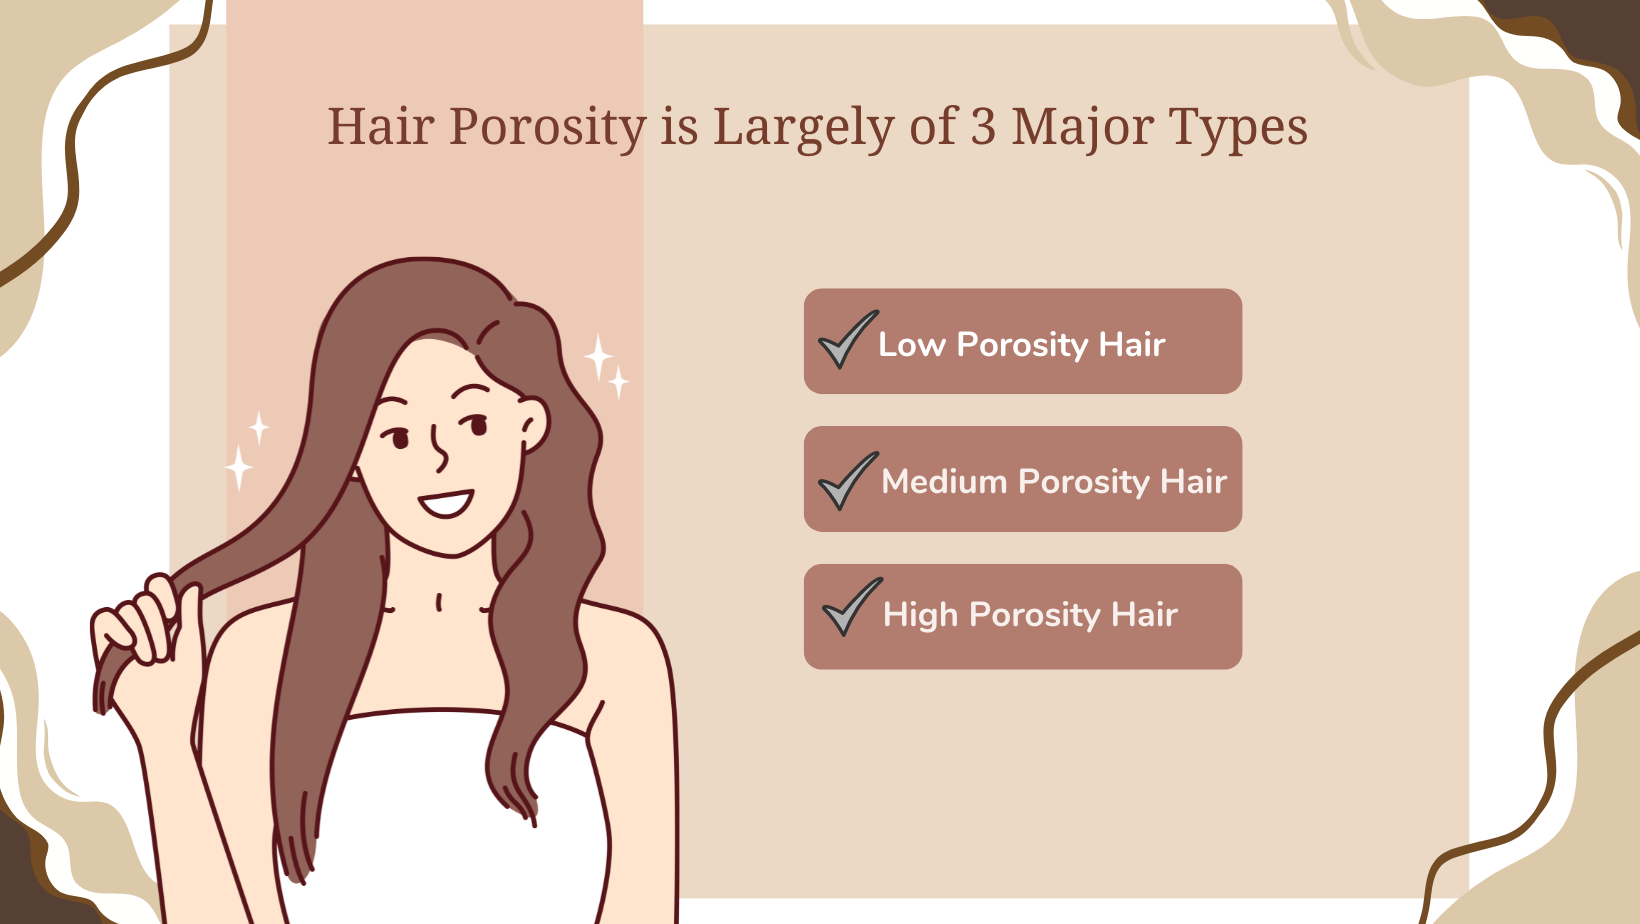 Hair porosity is largely of 3 major types